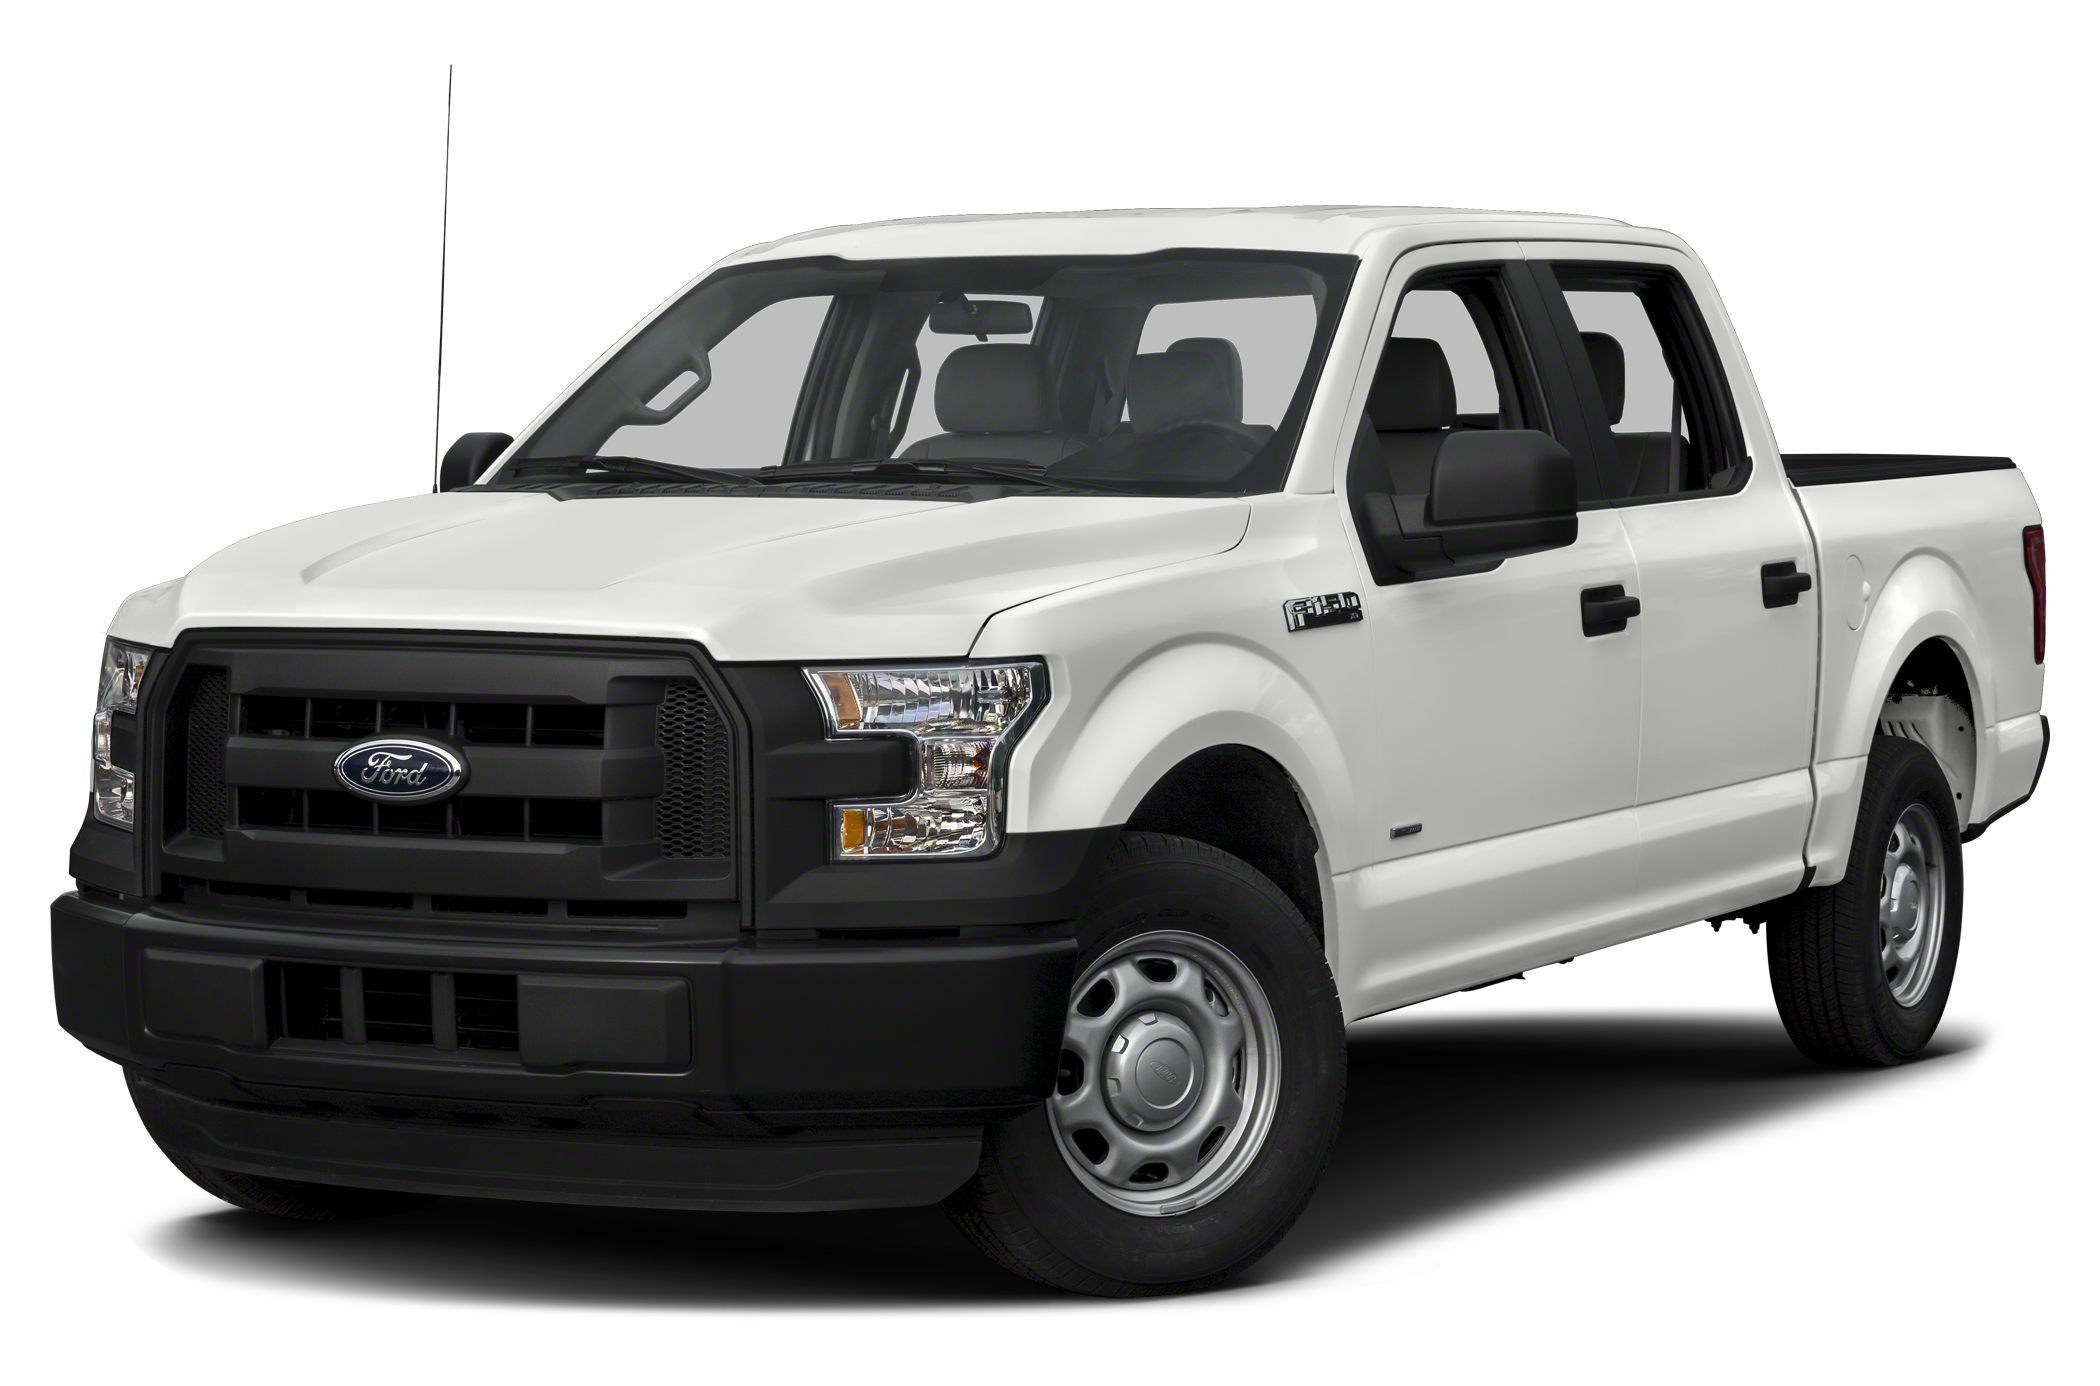 2016 Ford F 150 Xl 4x4 Supercrew Cab Styleside 5 5 Ft Box 145 In Wb Pictures